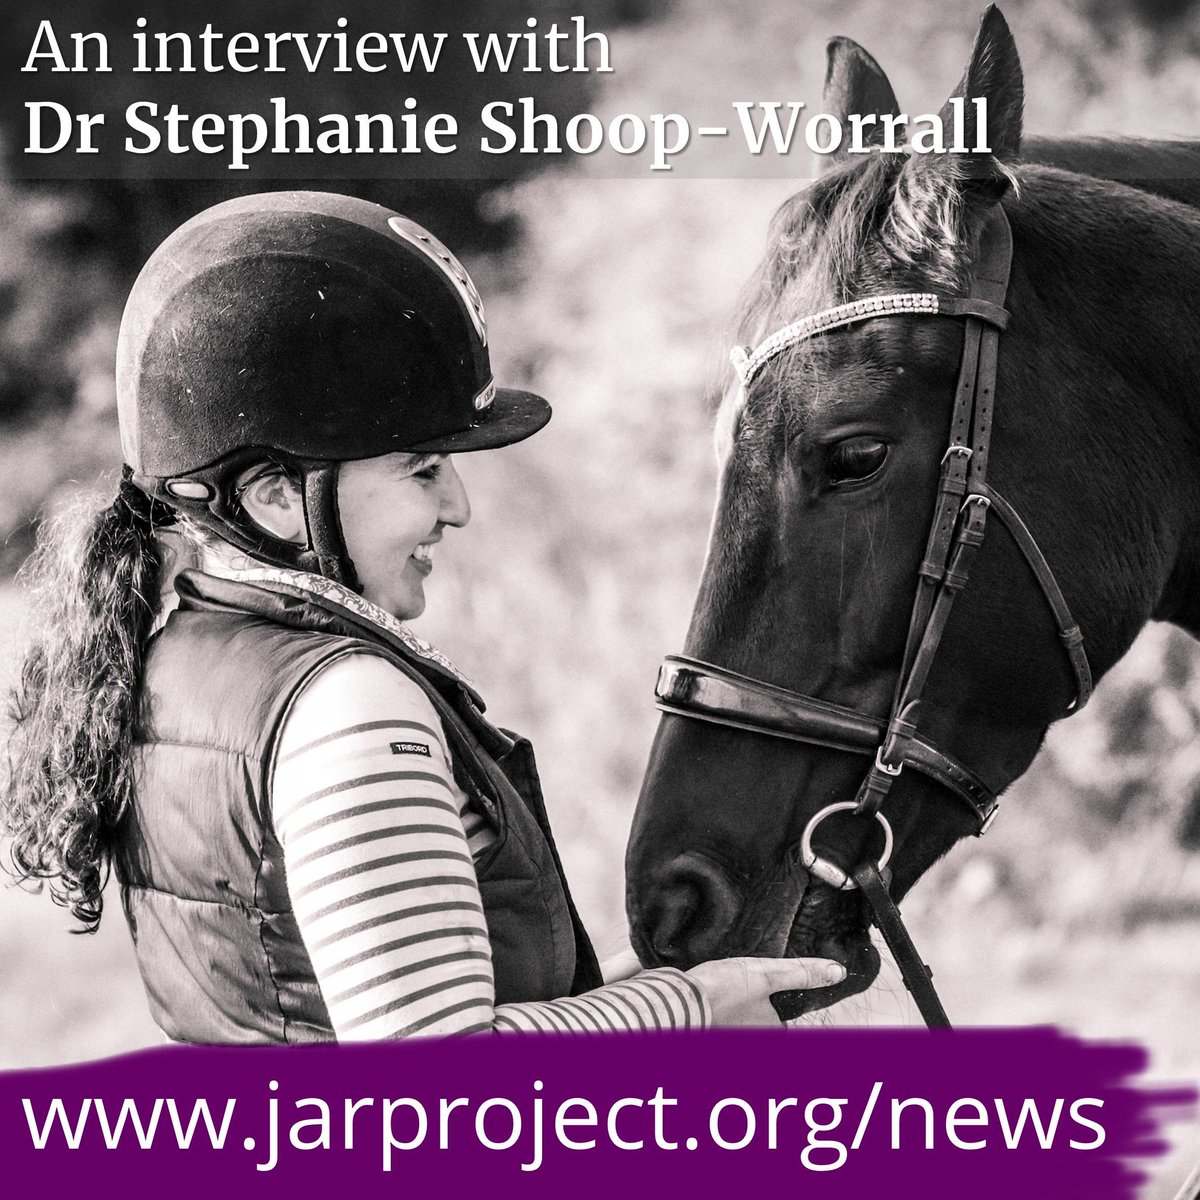 Tomorrow is International Day of Women and Girls in Science and we have a brilliant new interview coming up. But first, a throwback to last year's interview with @sshoopworrall covering everything from AI to socks to horses. jarproject.org/news/2023/IDWGS @womenscienceday #IDWGS